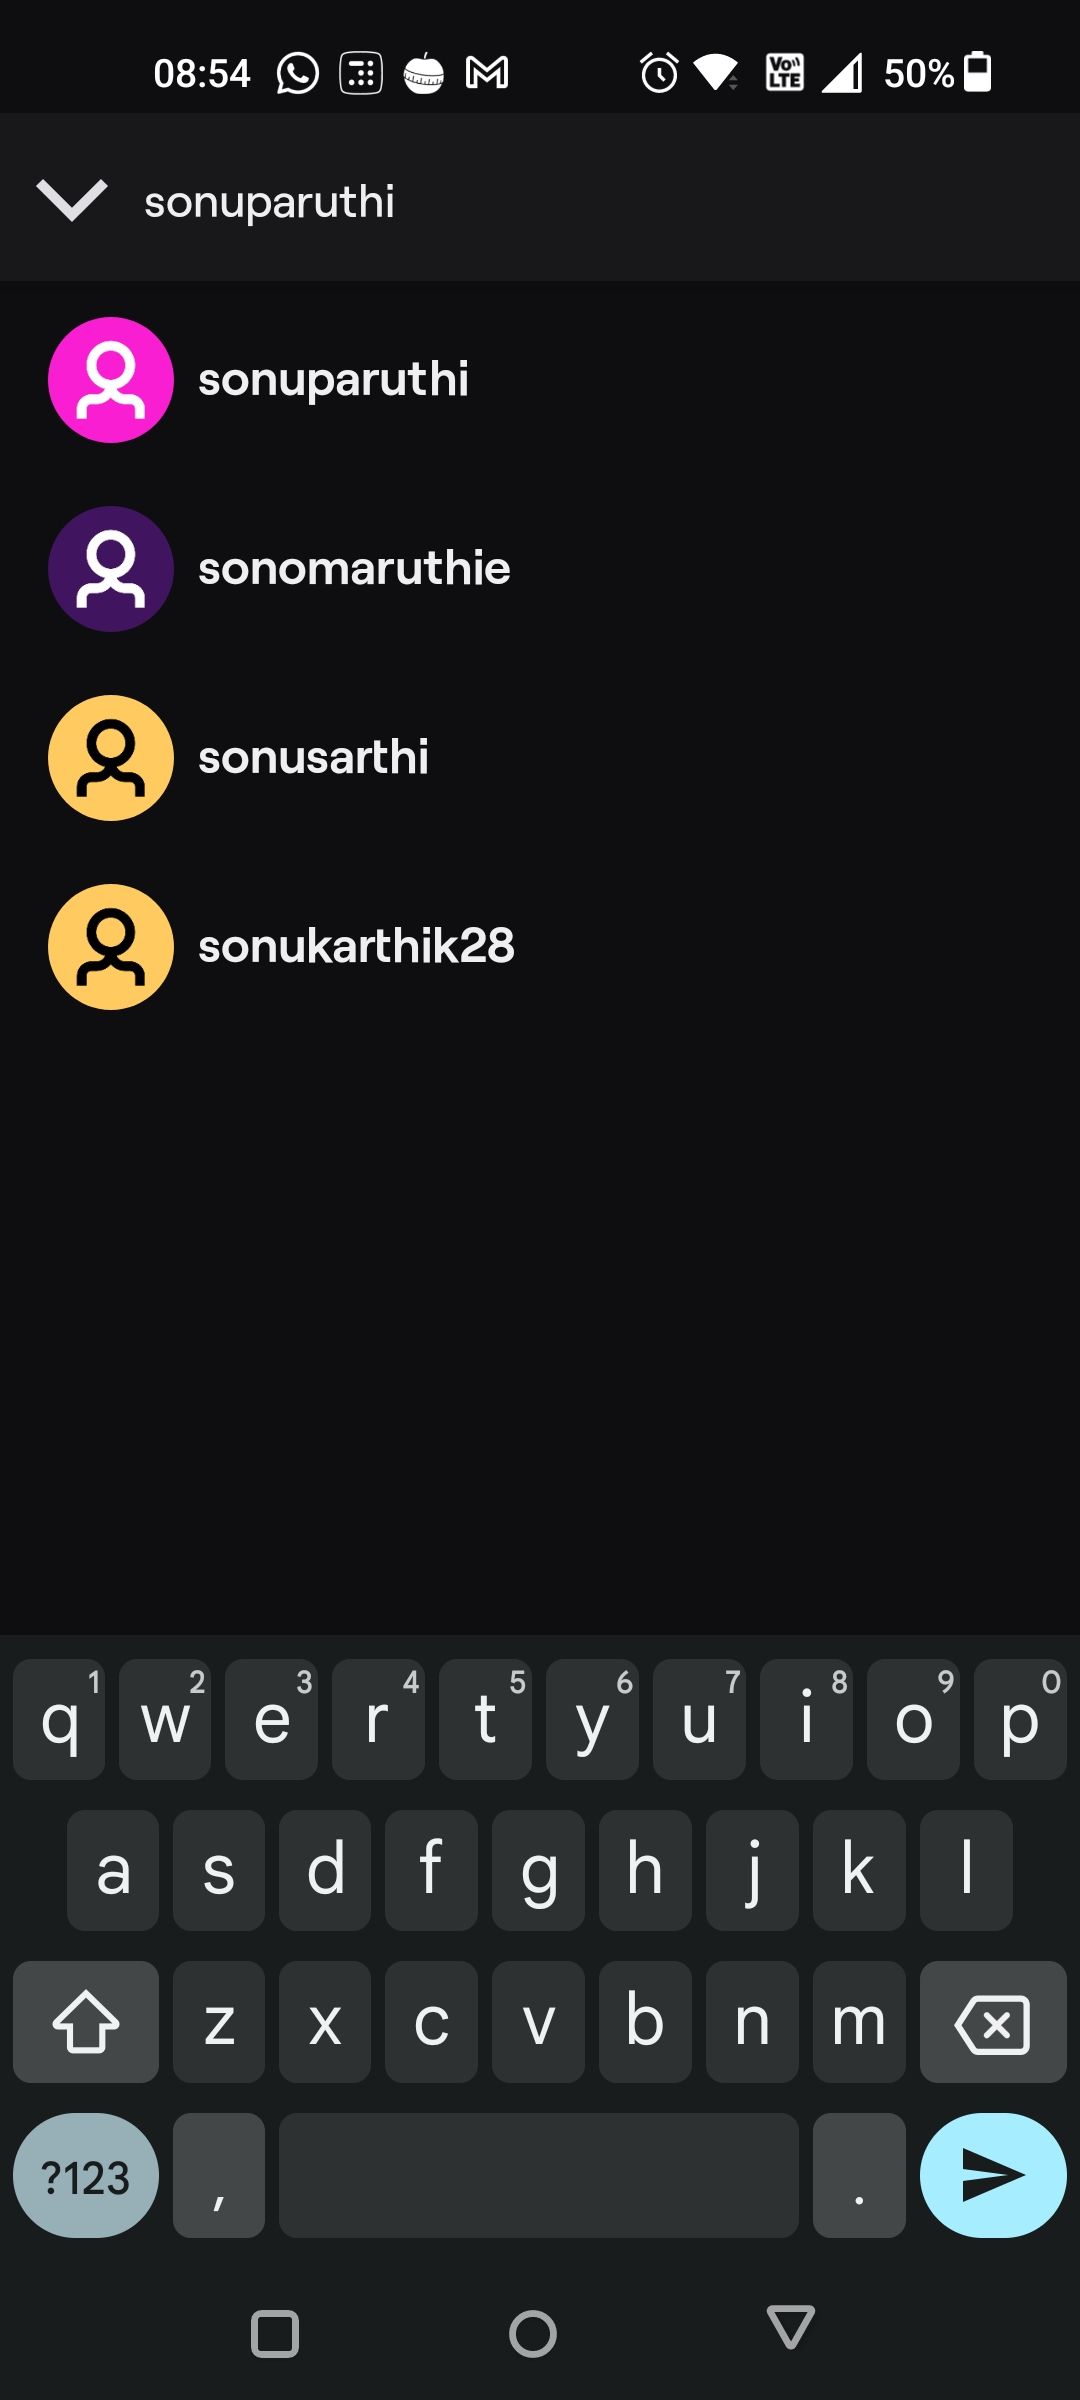 User Search on Start a Whisper Page